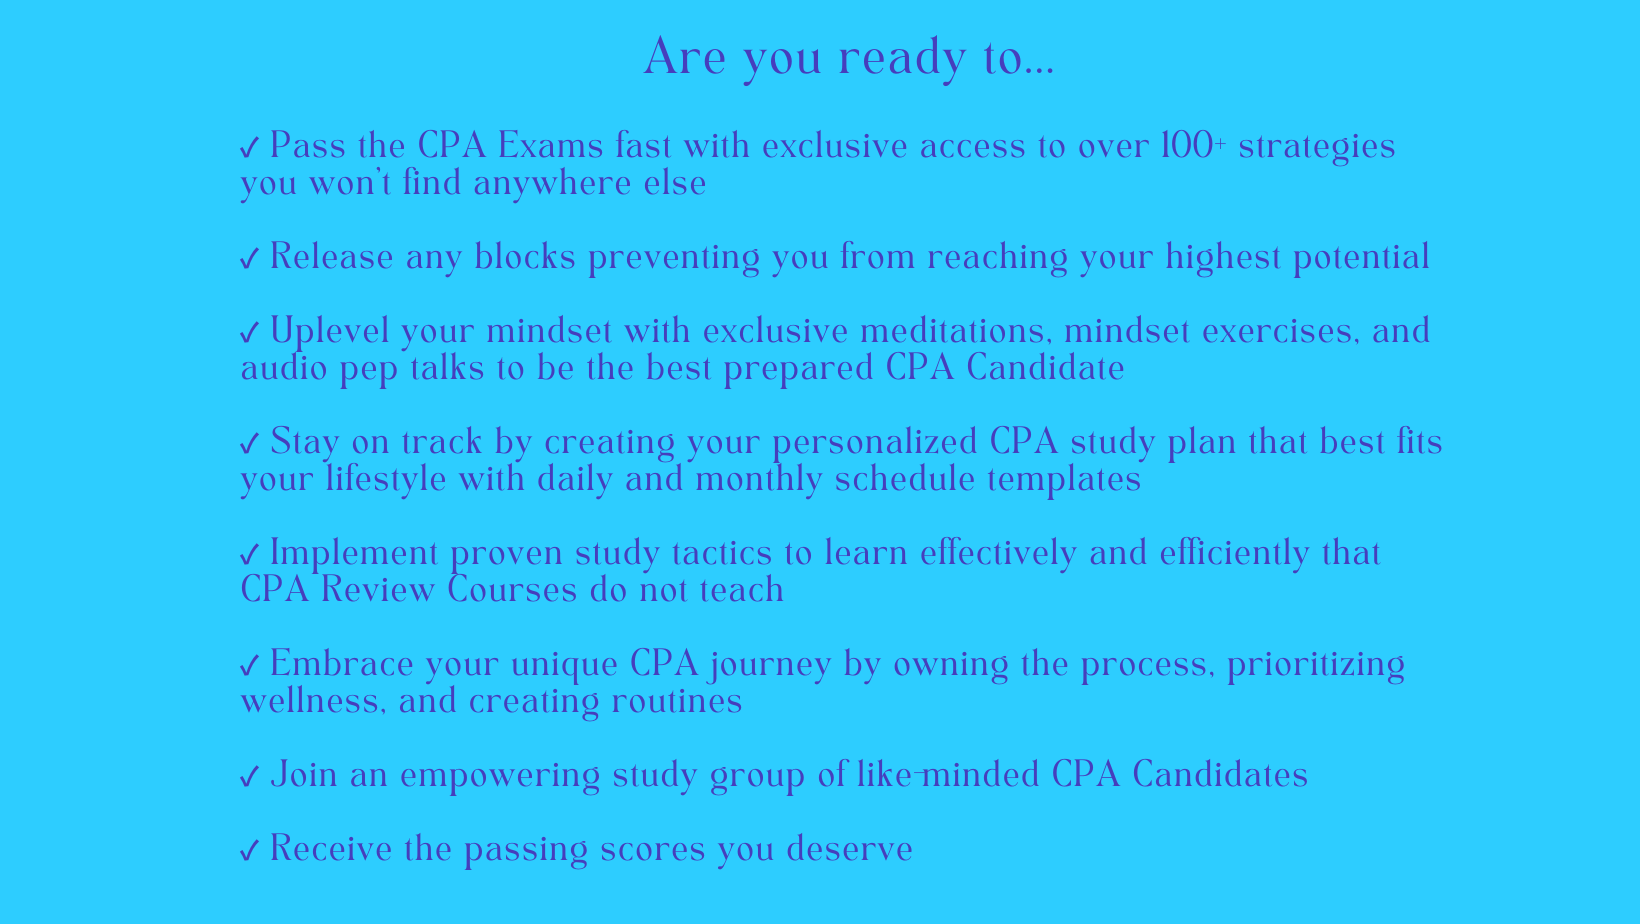 how to pass the cpa exams